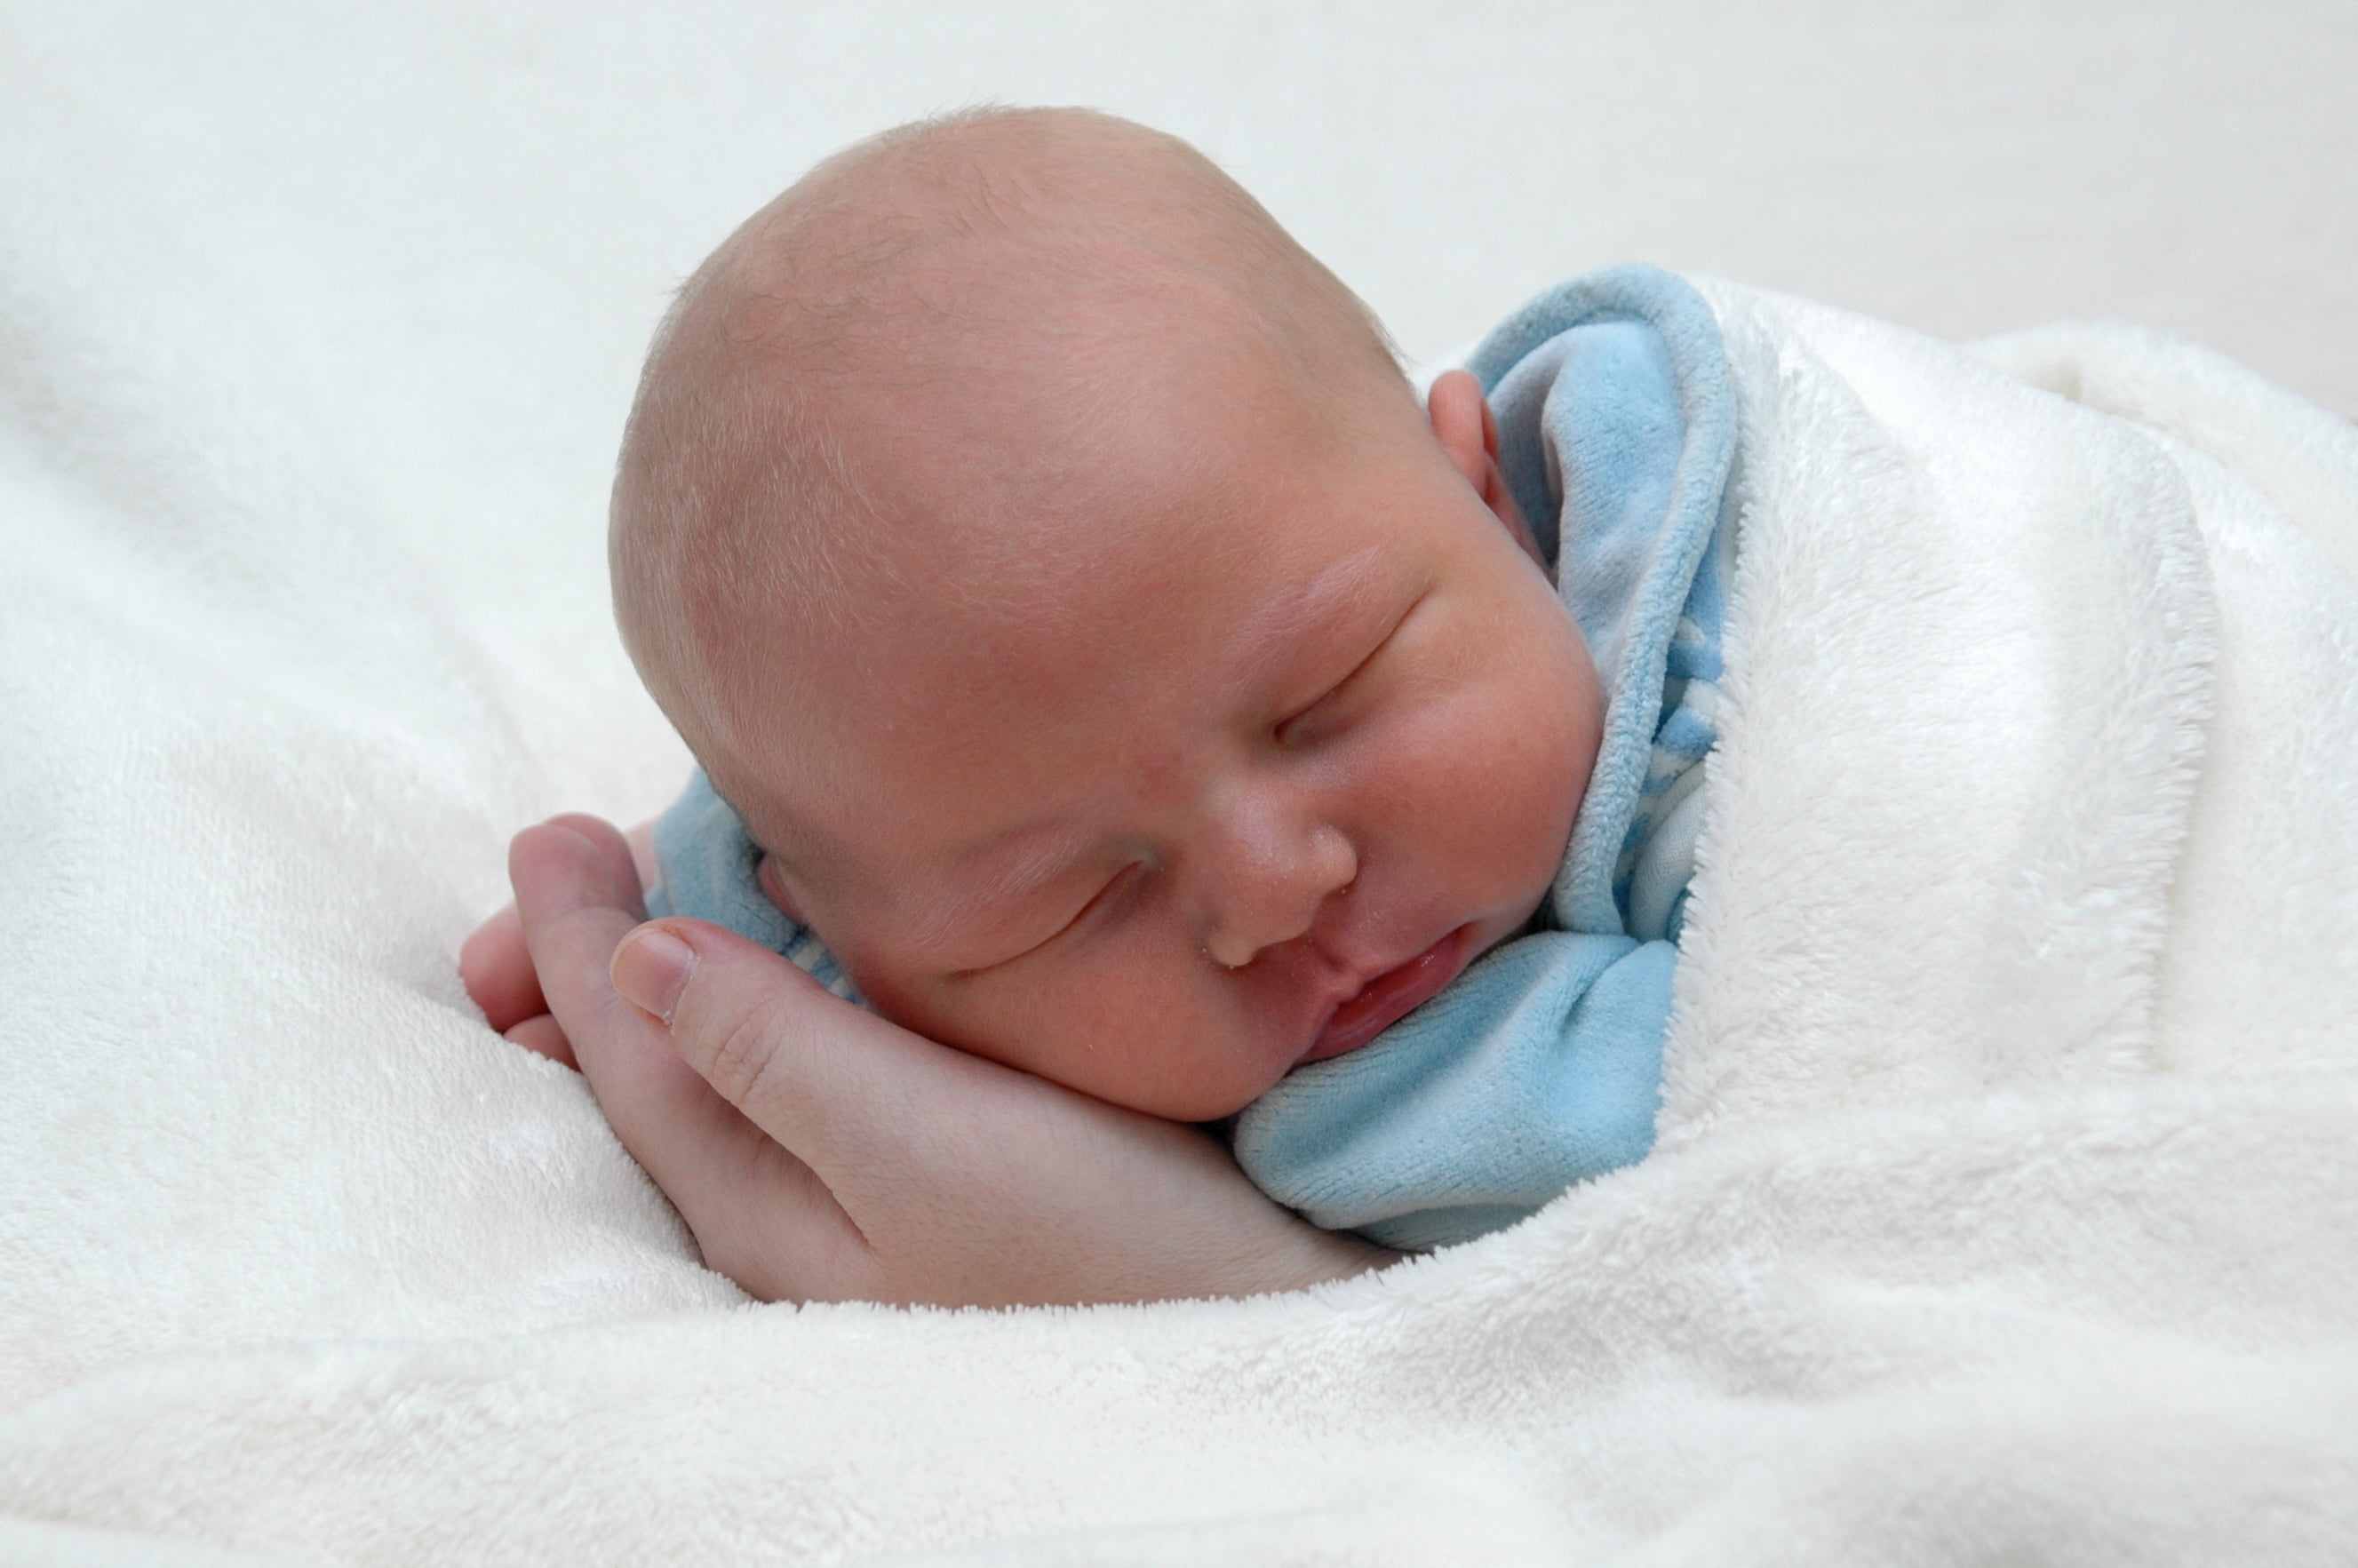 sleeping baby on white textile in close-up photography, child